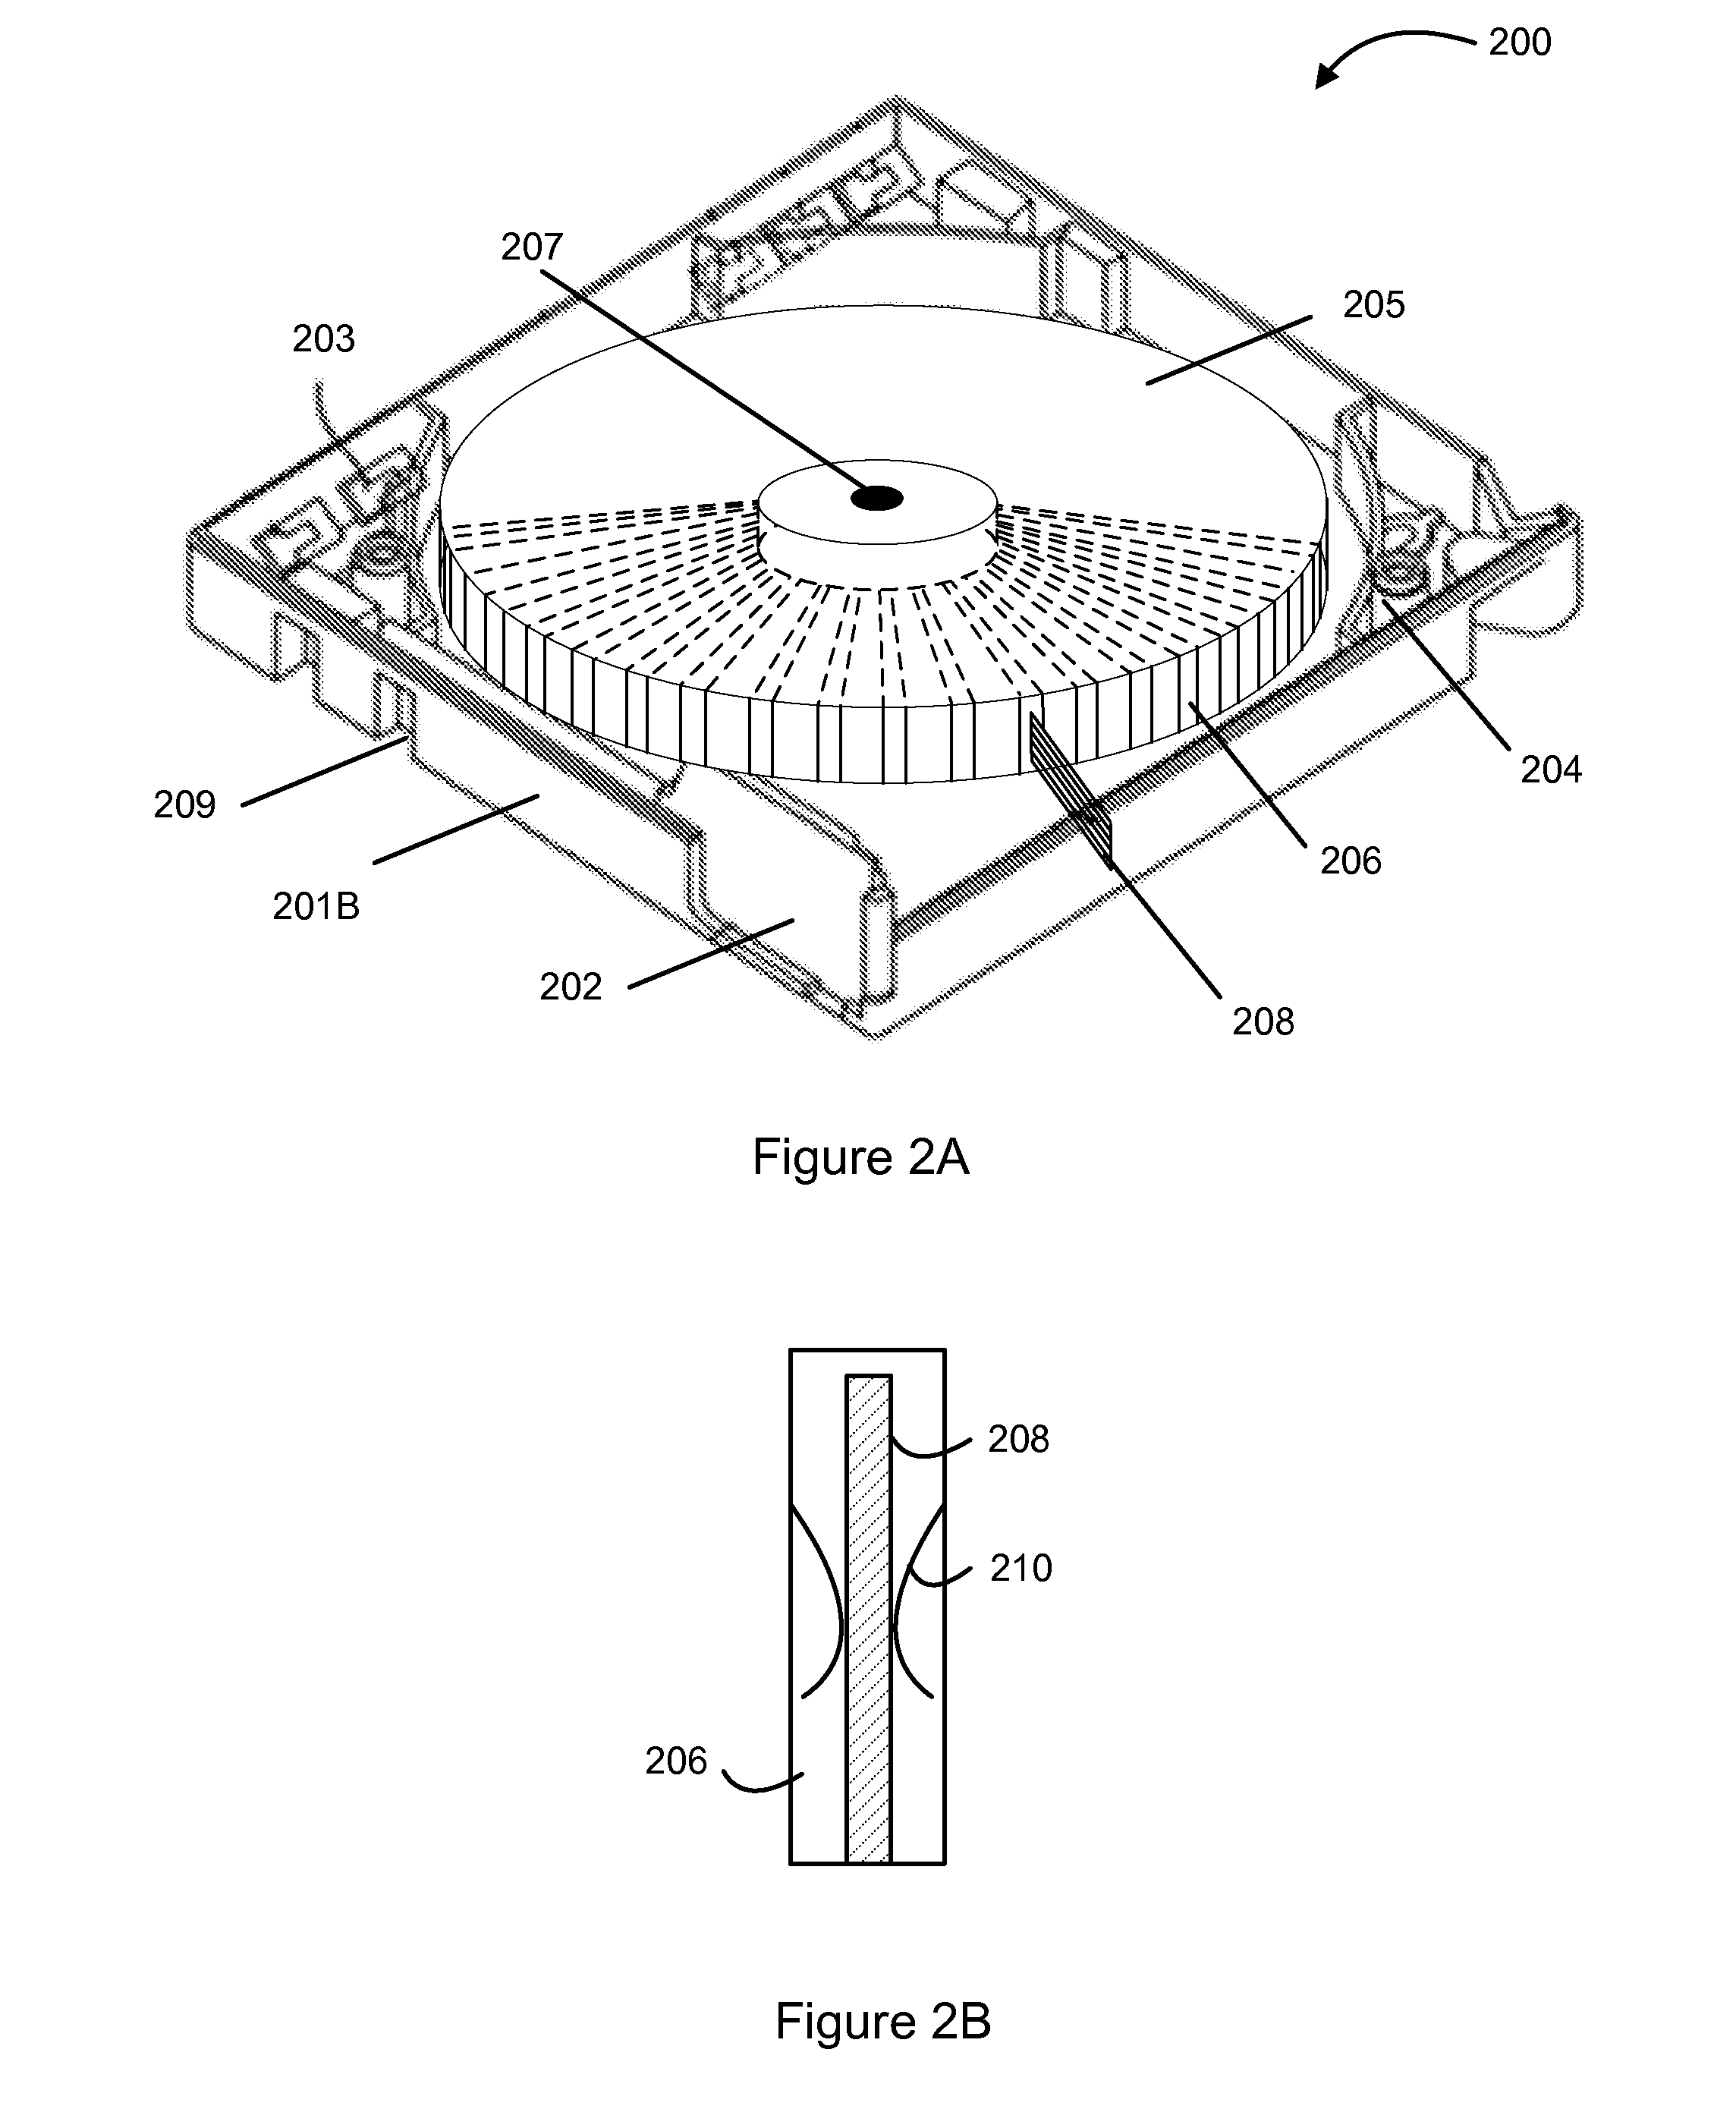 Biosample cartridge with radial slots for storing biosample carriers and using in automated data storage systems